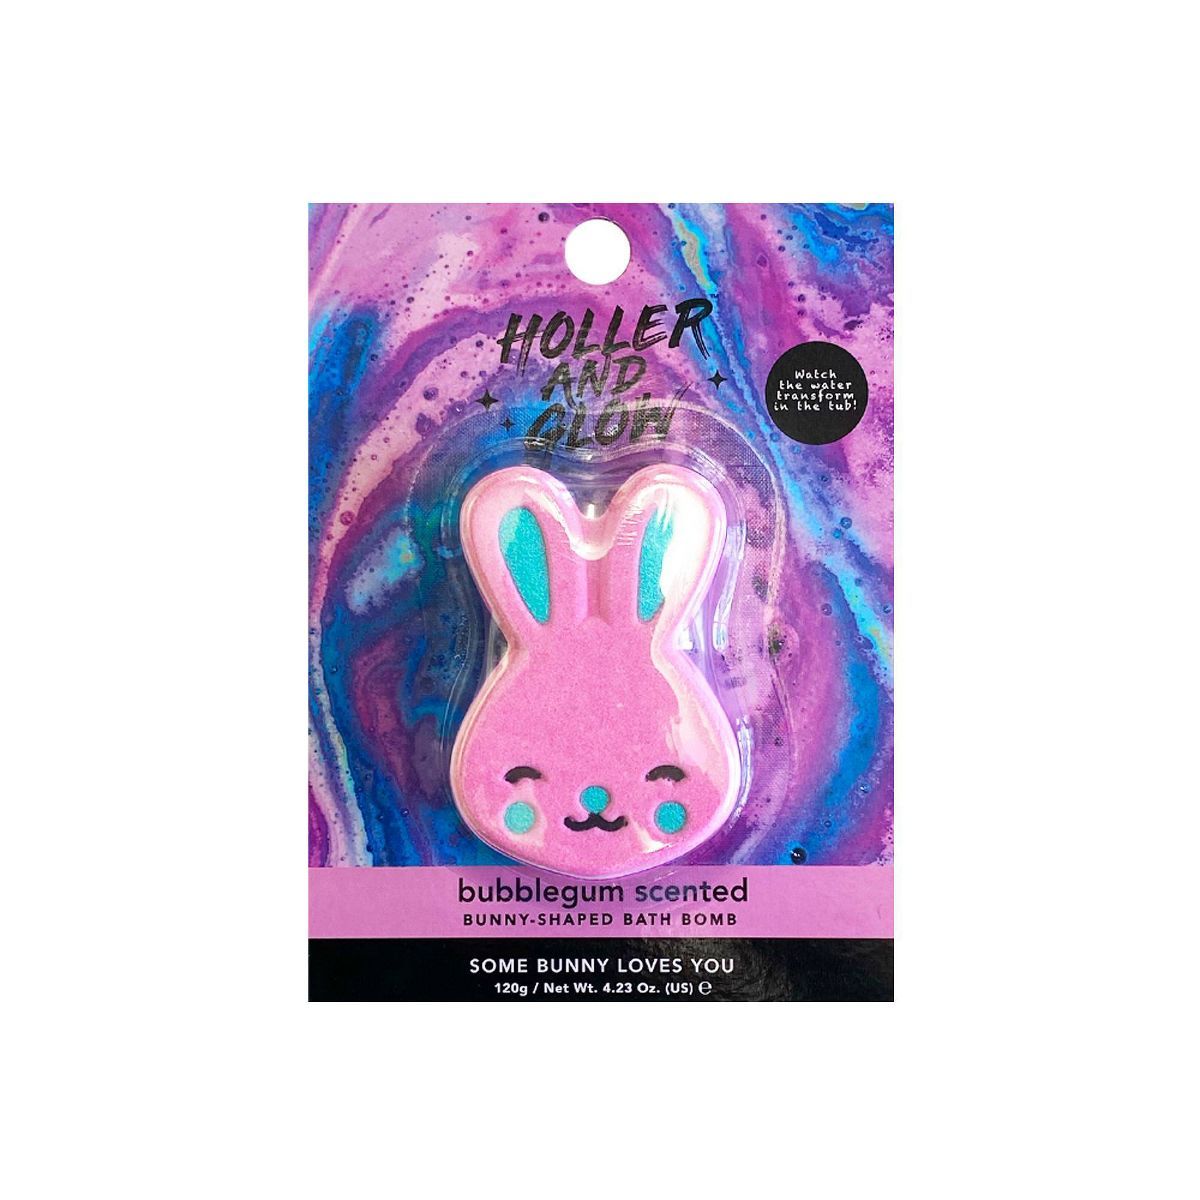 Holler and Glow Bunny 'Some Bunny Loves You' Bath Bomb - 4.23oz | Target